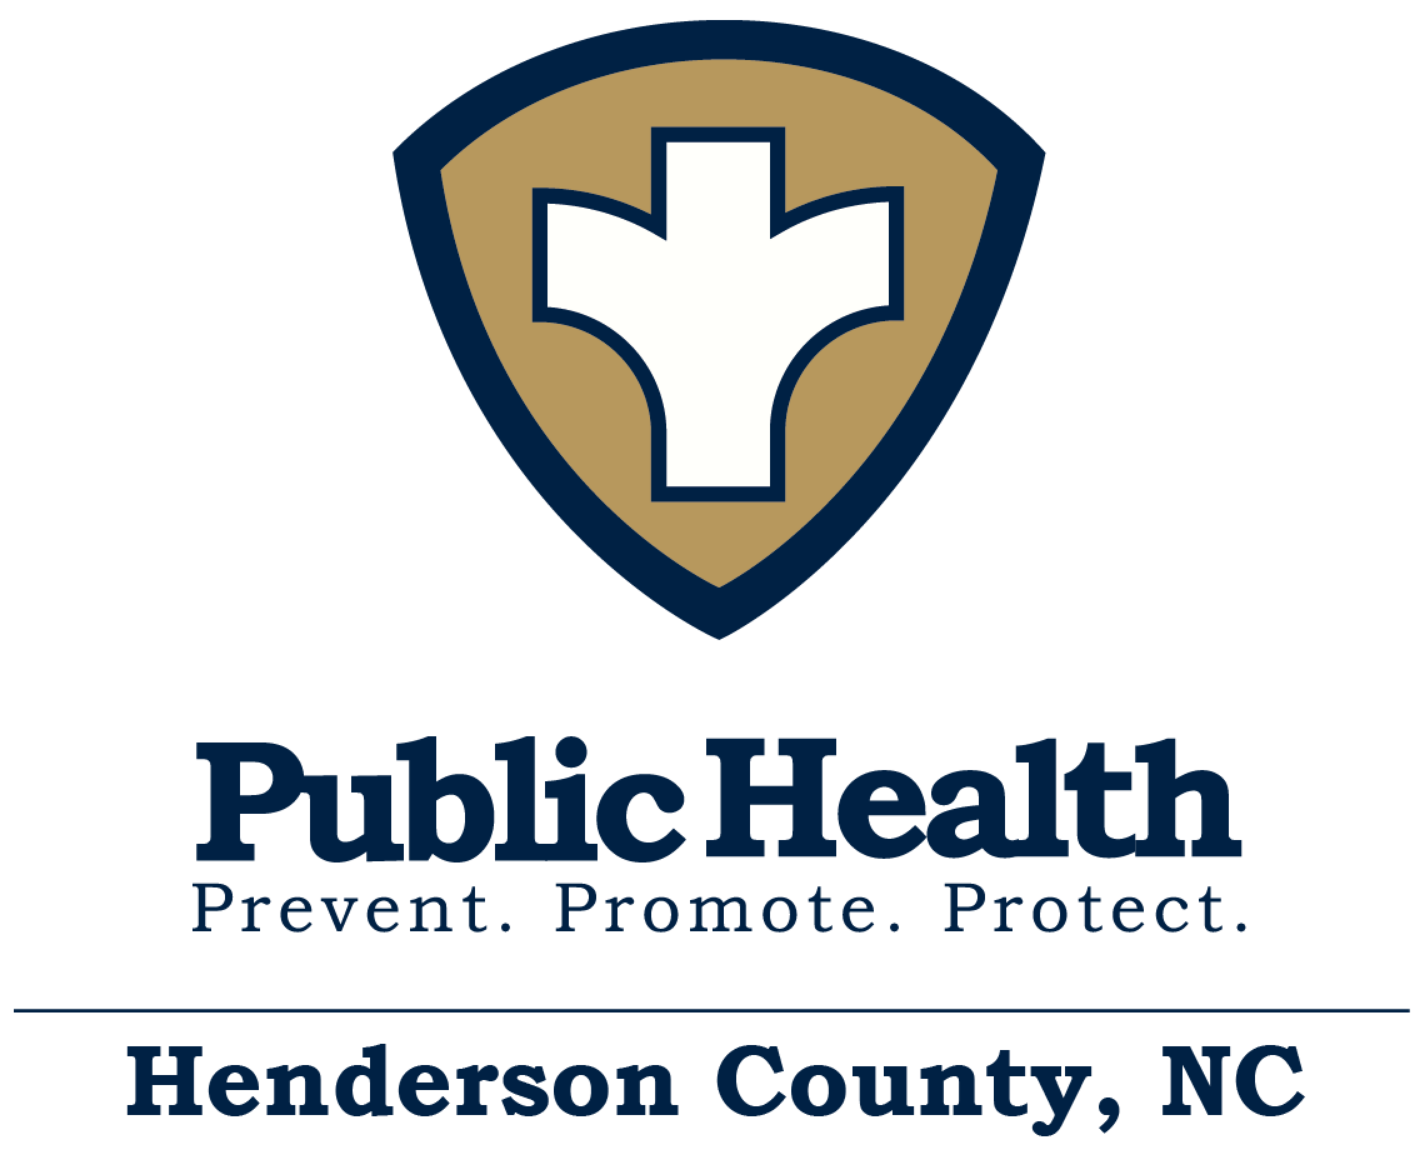 Henderson County Department of Public Health